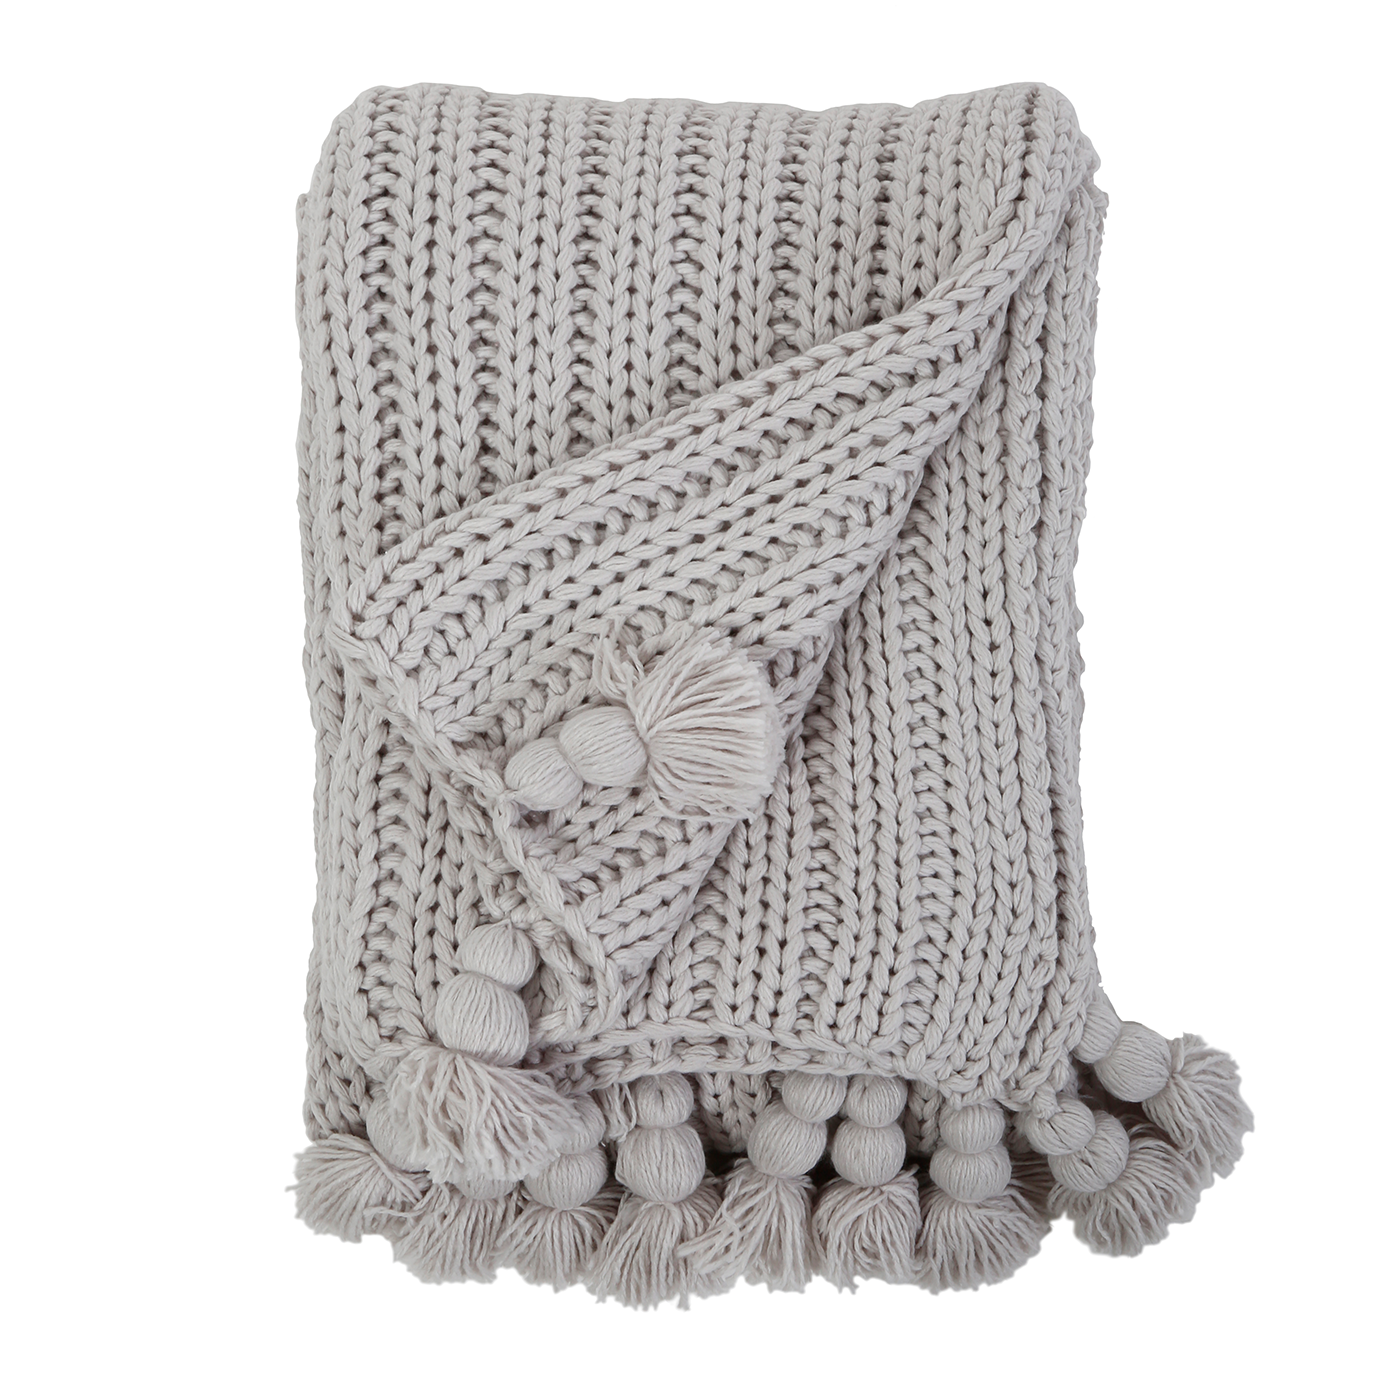 ANACAPA OVERSIZED THROW - Grey COLOR by Pompom At Home